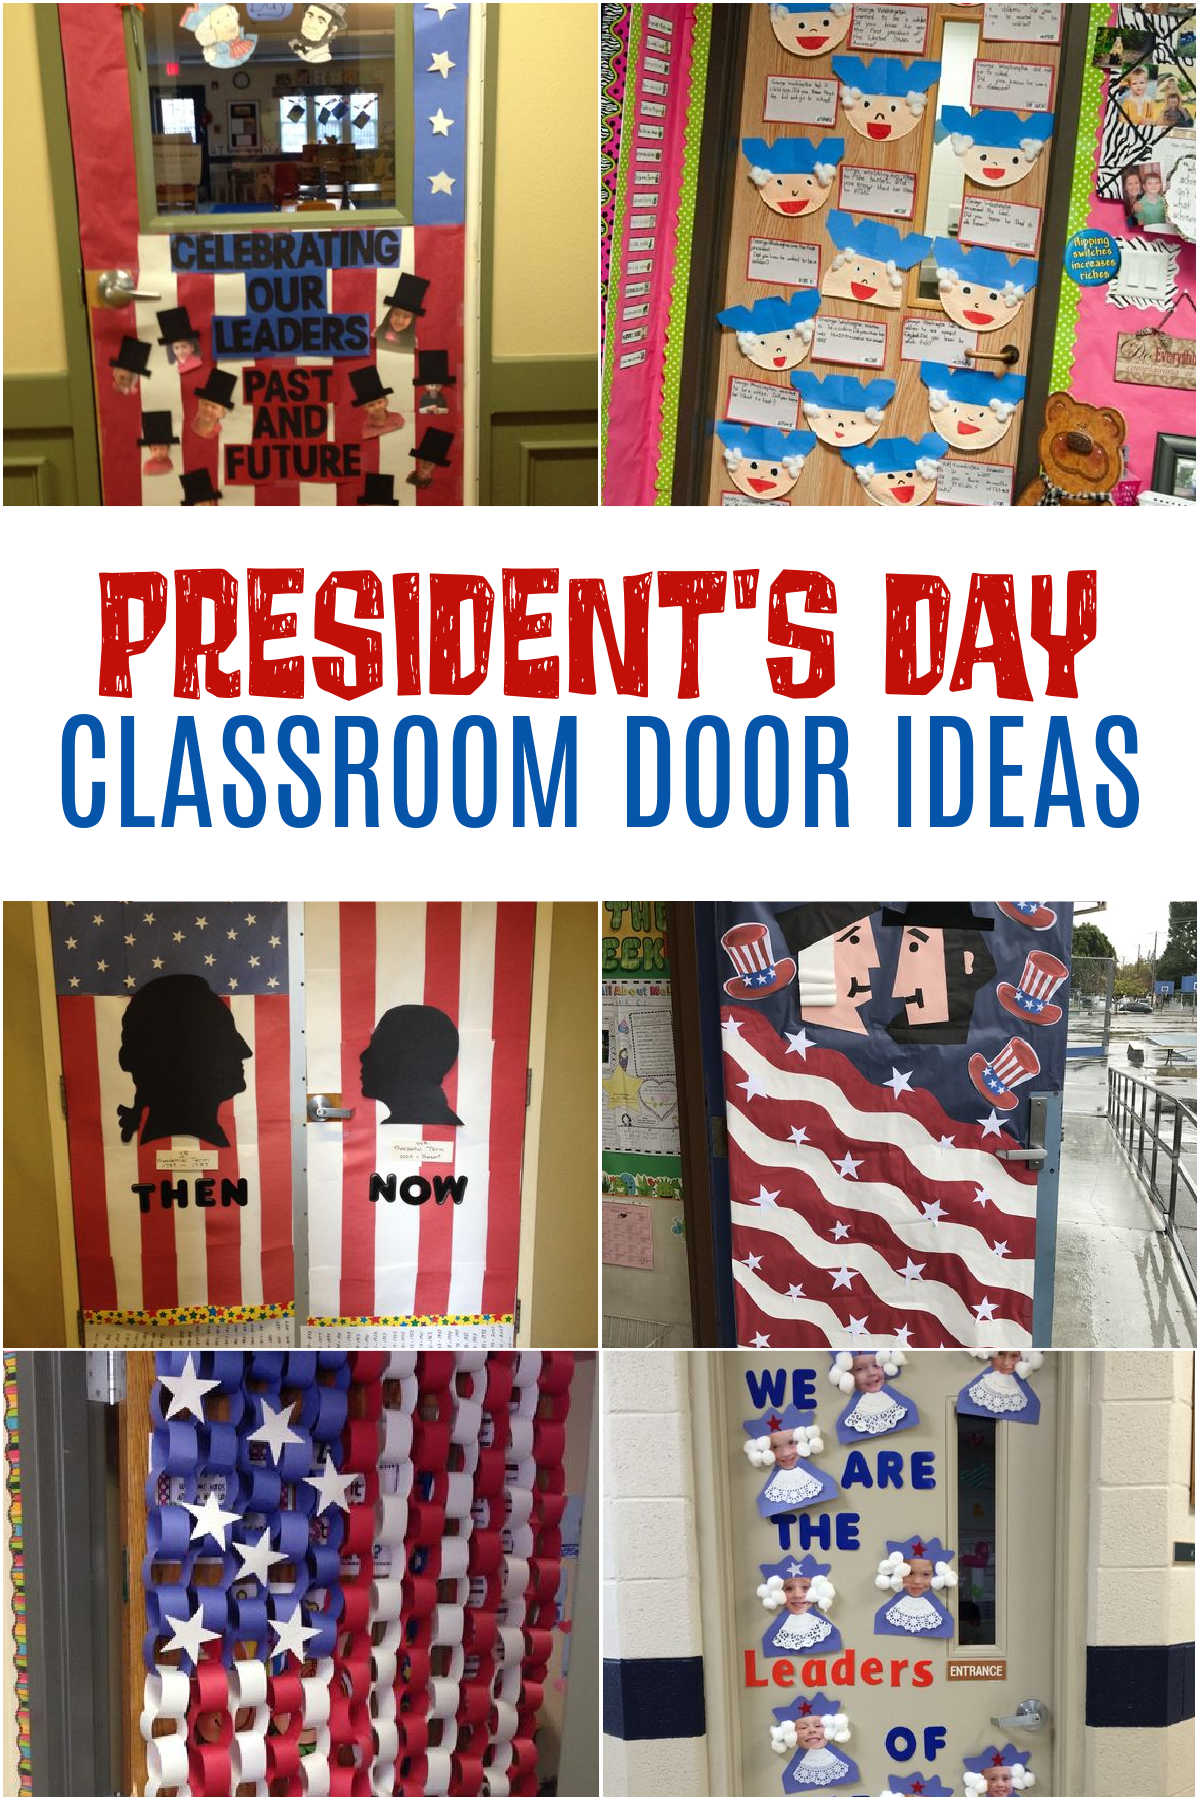 Collage of Classroom door ideas for President's Day